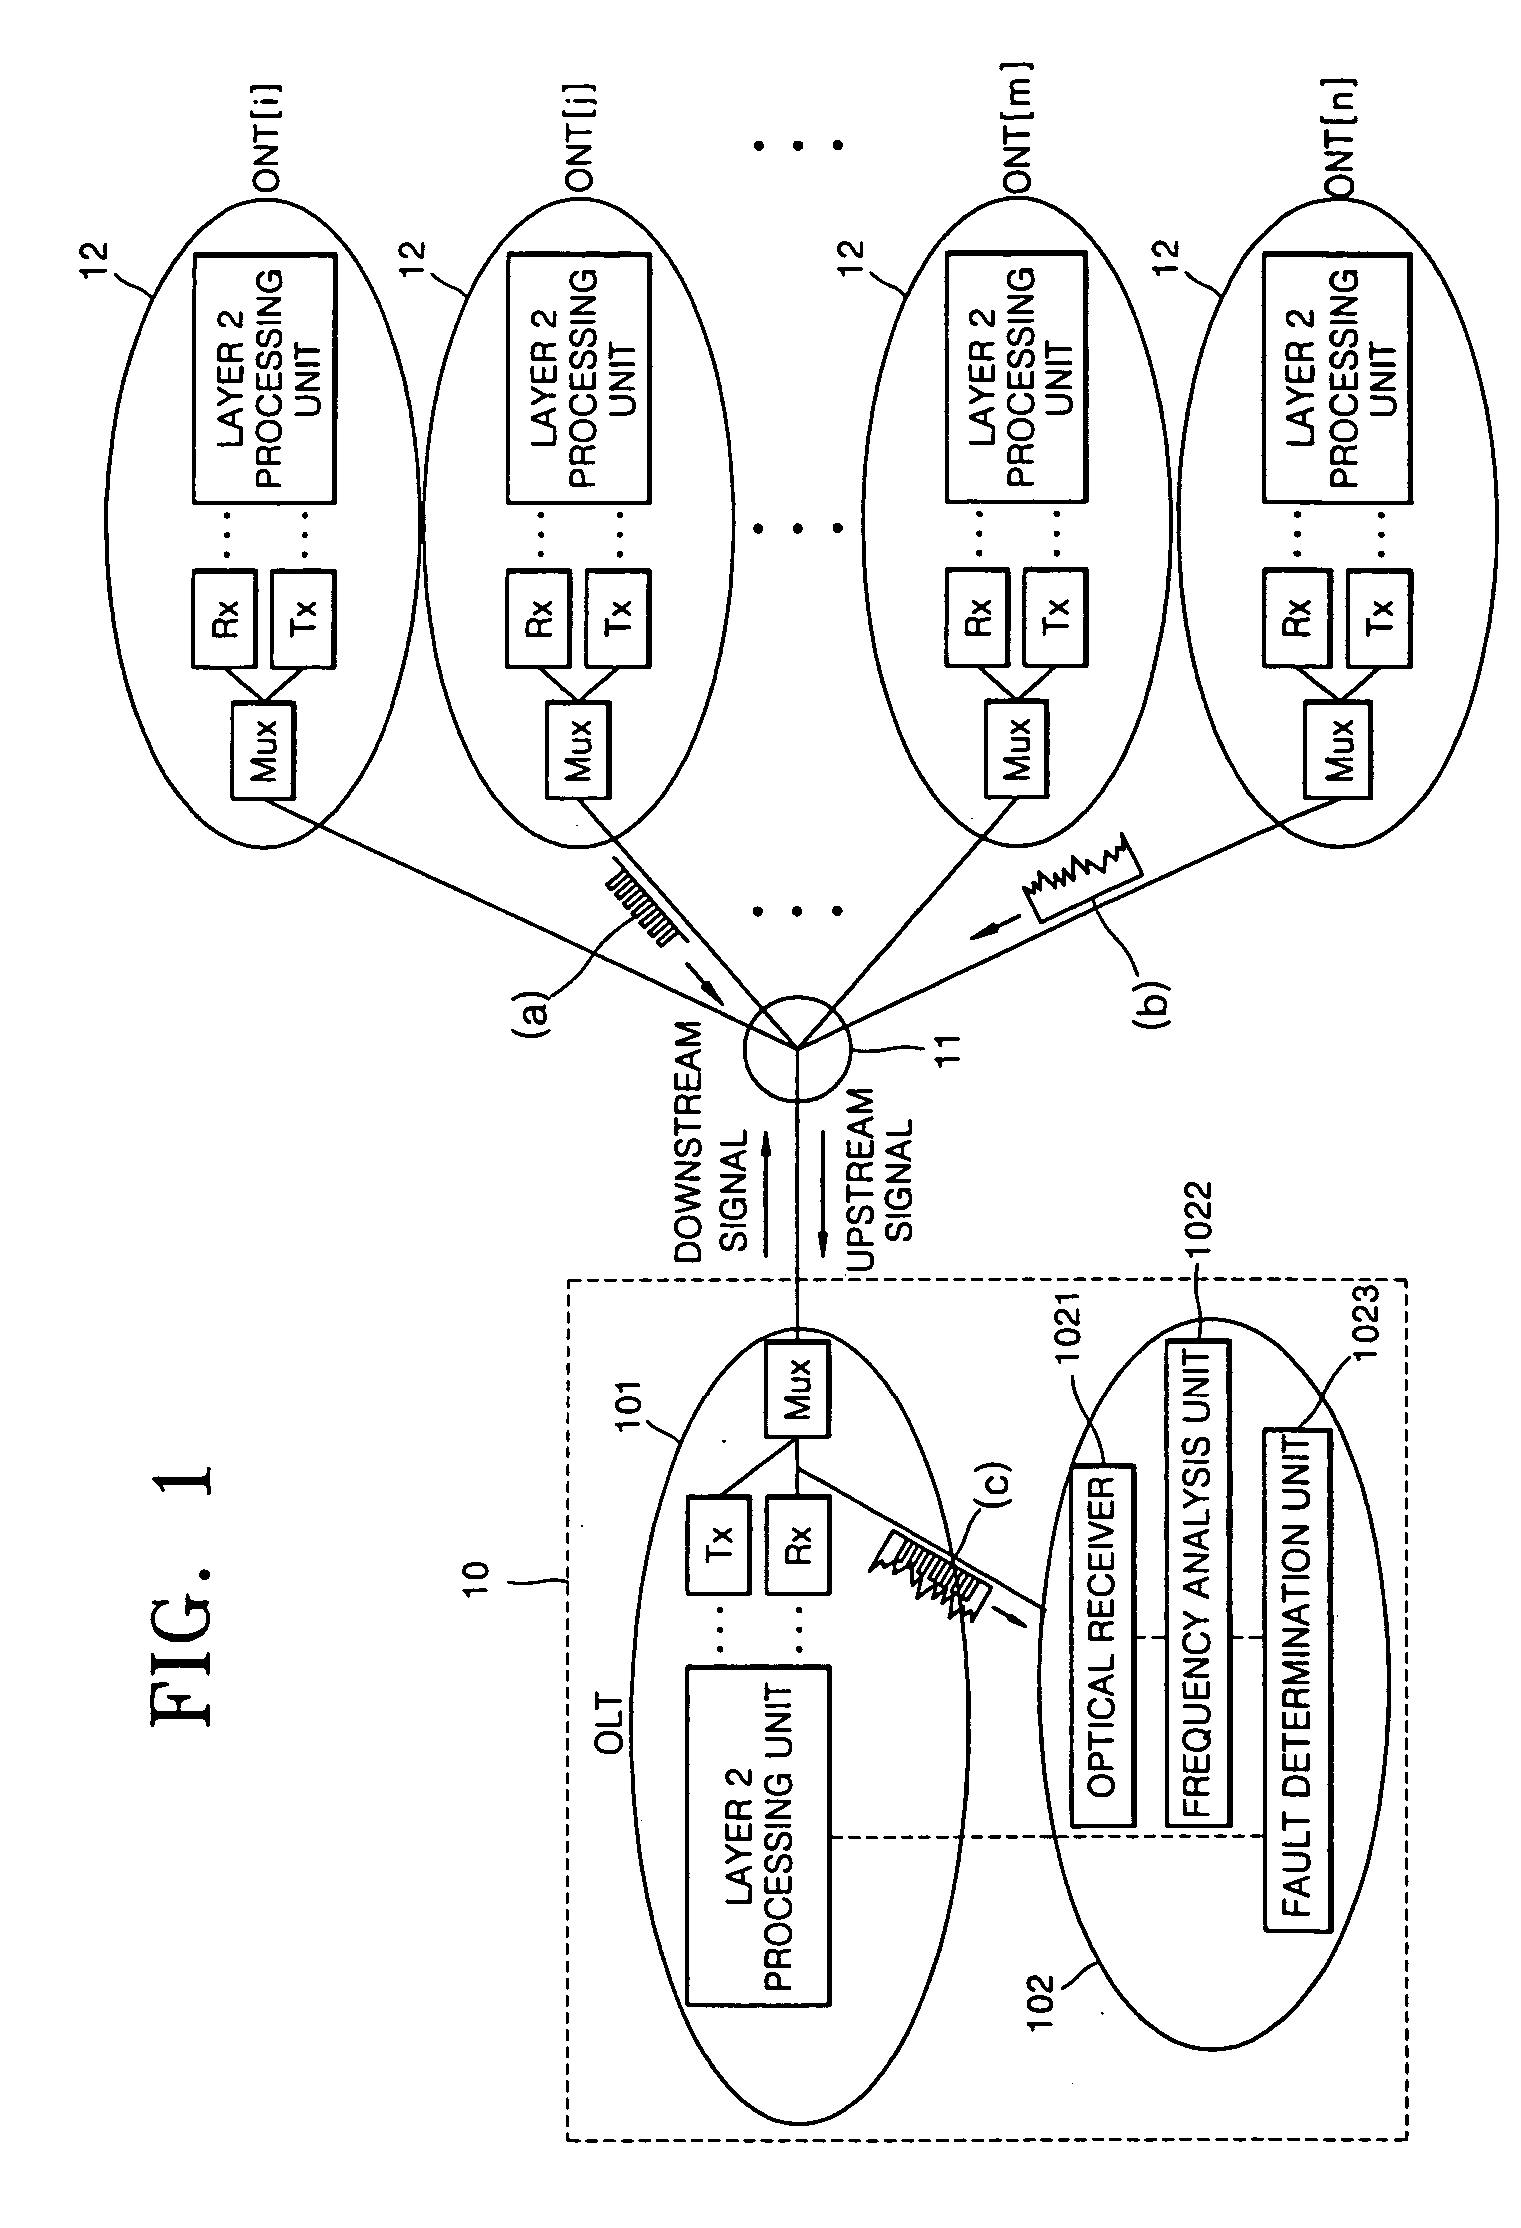 Apparatus for remotely determining fault of subscriber terminals and method thereof